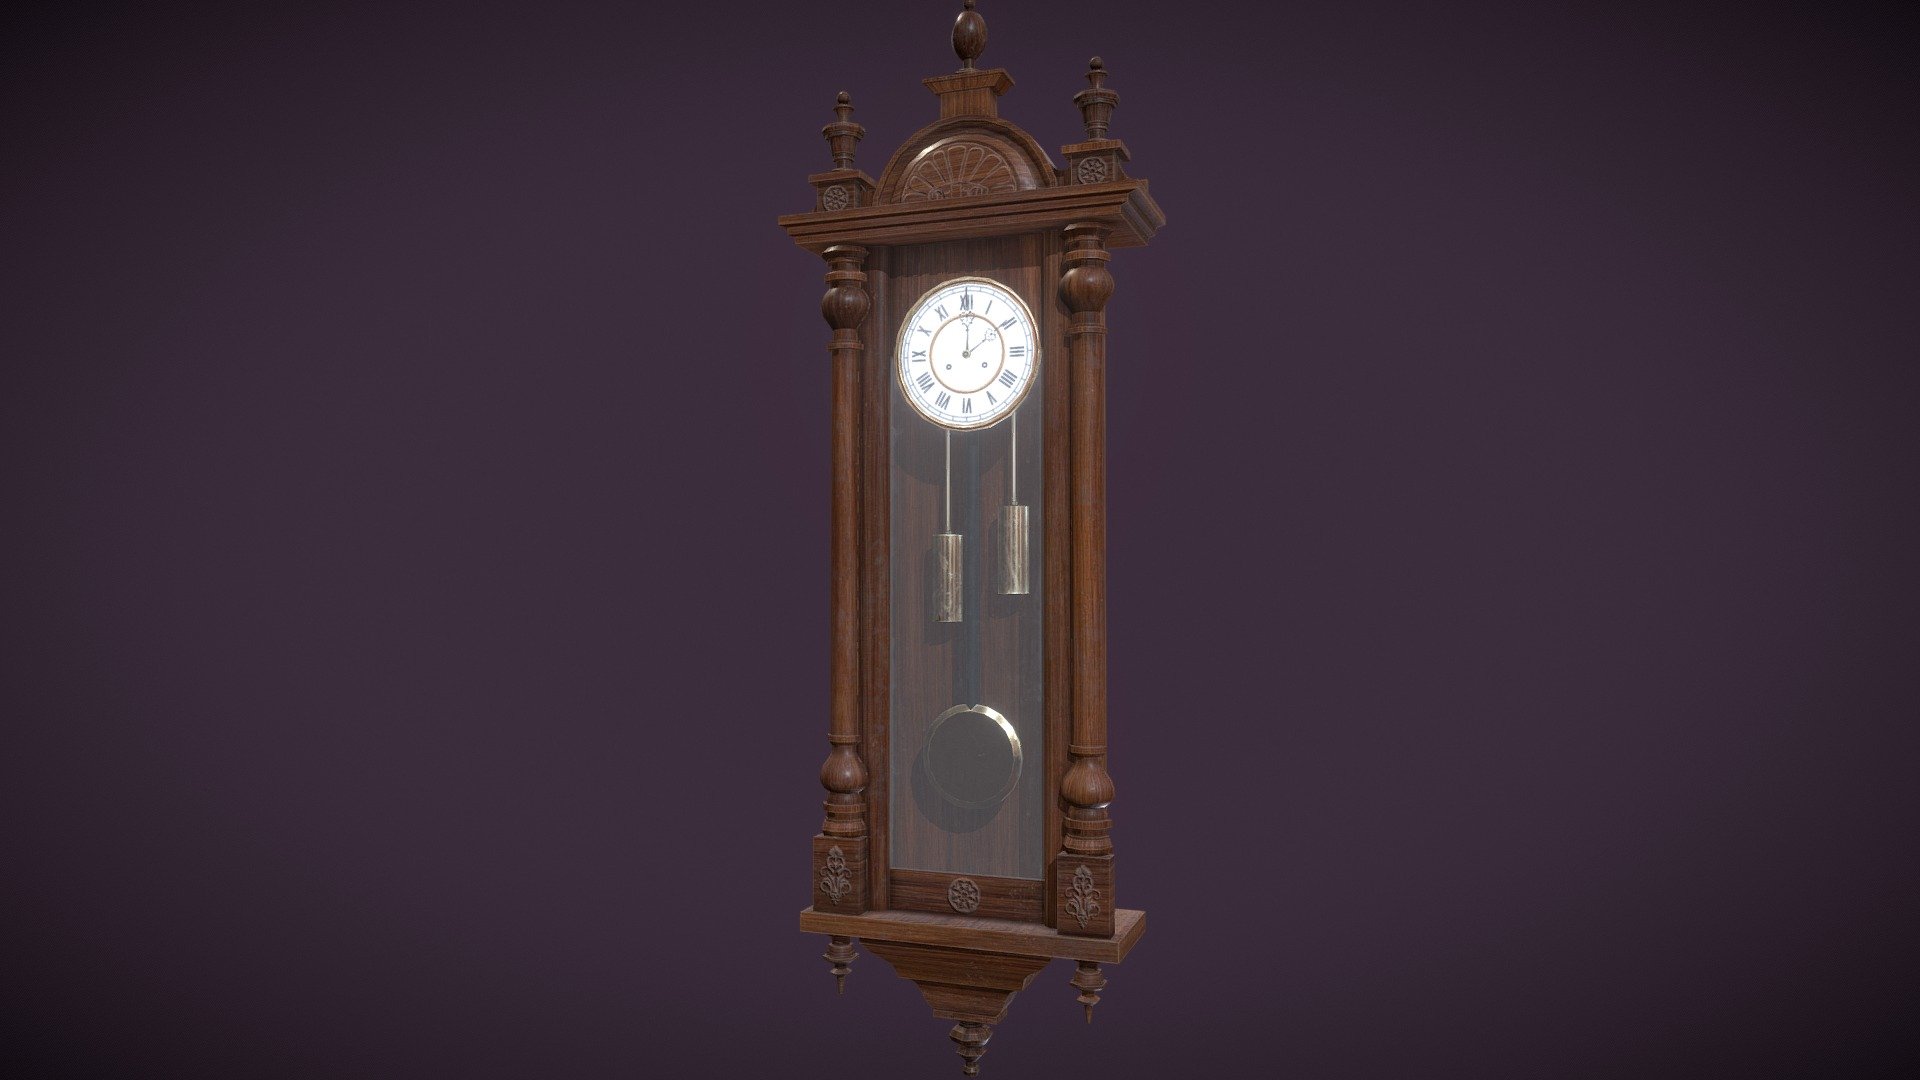 Detailed gameready PBR 3d model of an antique wall clock from 1930's. Textures  - 2048x2048 px, format - png 3d model